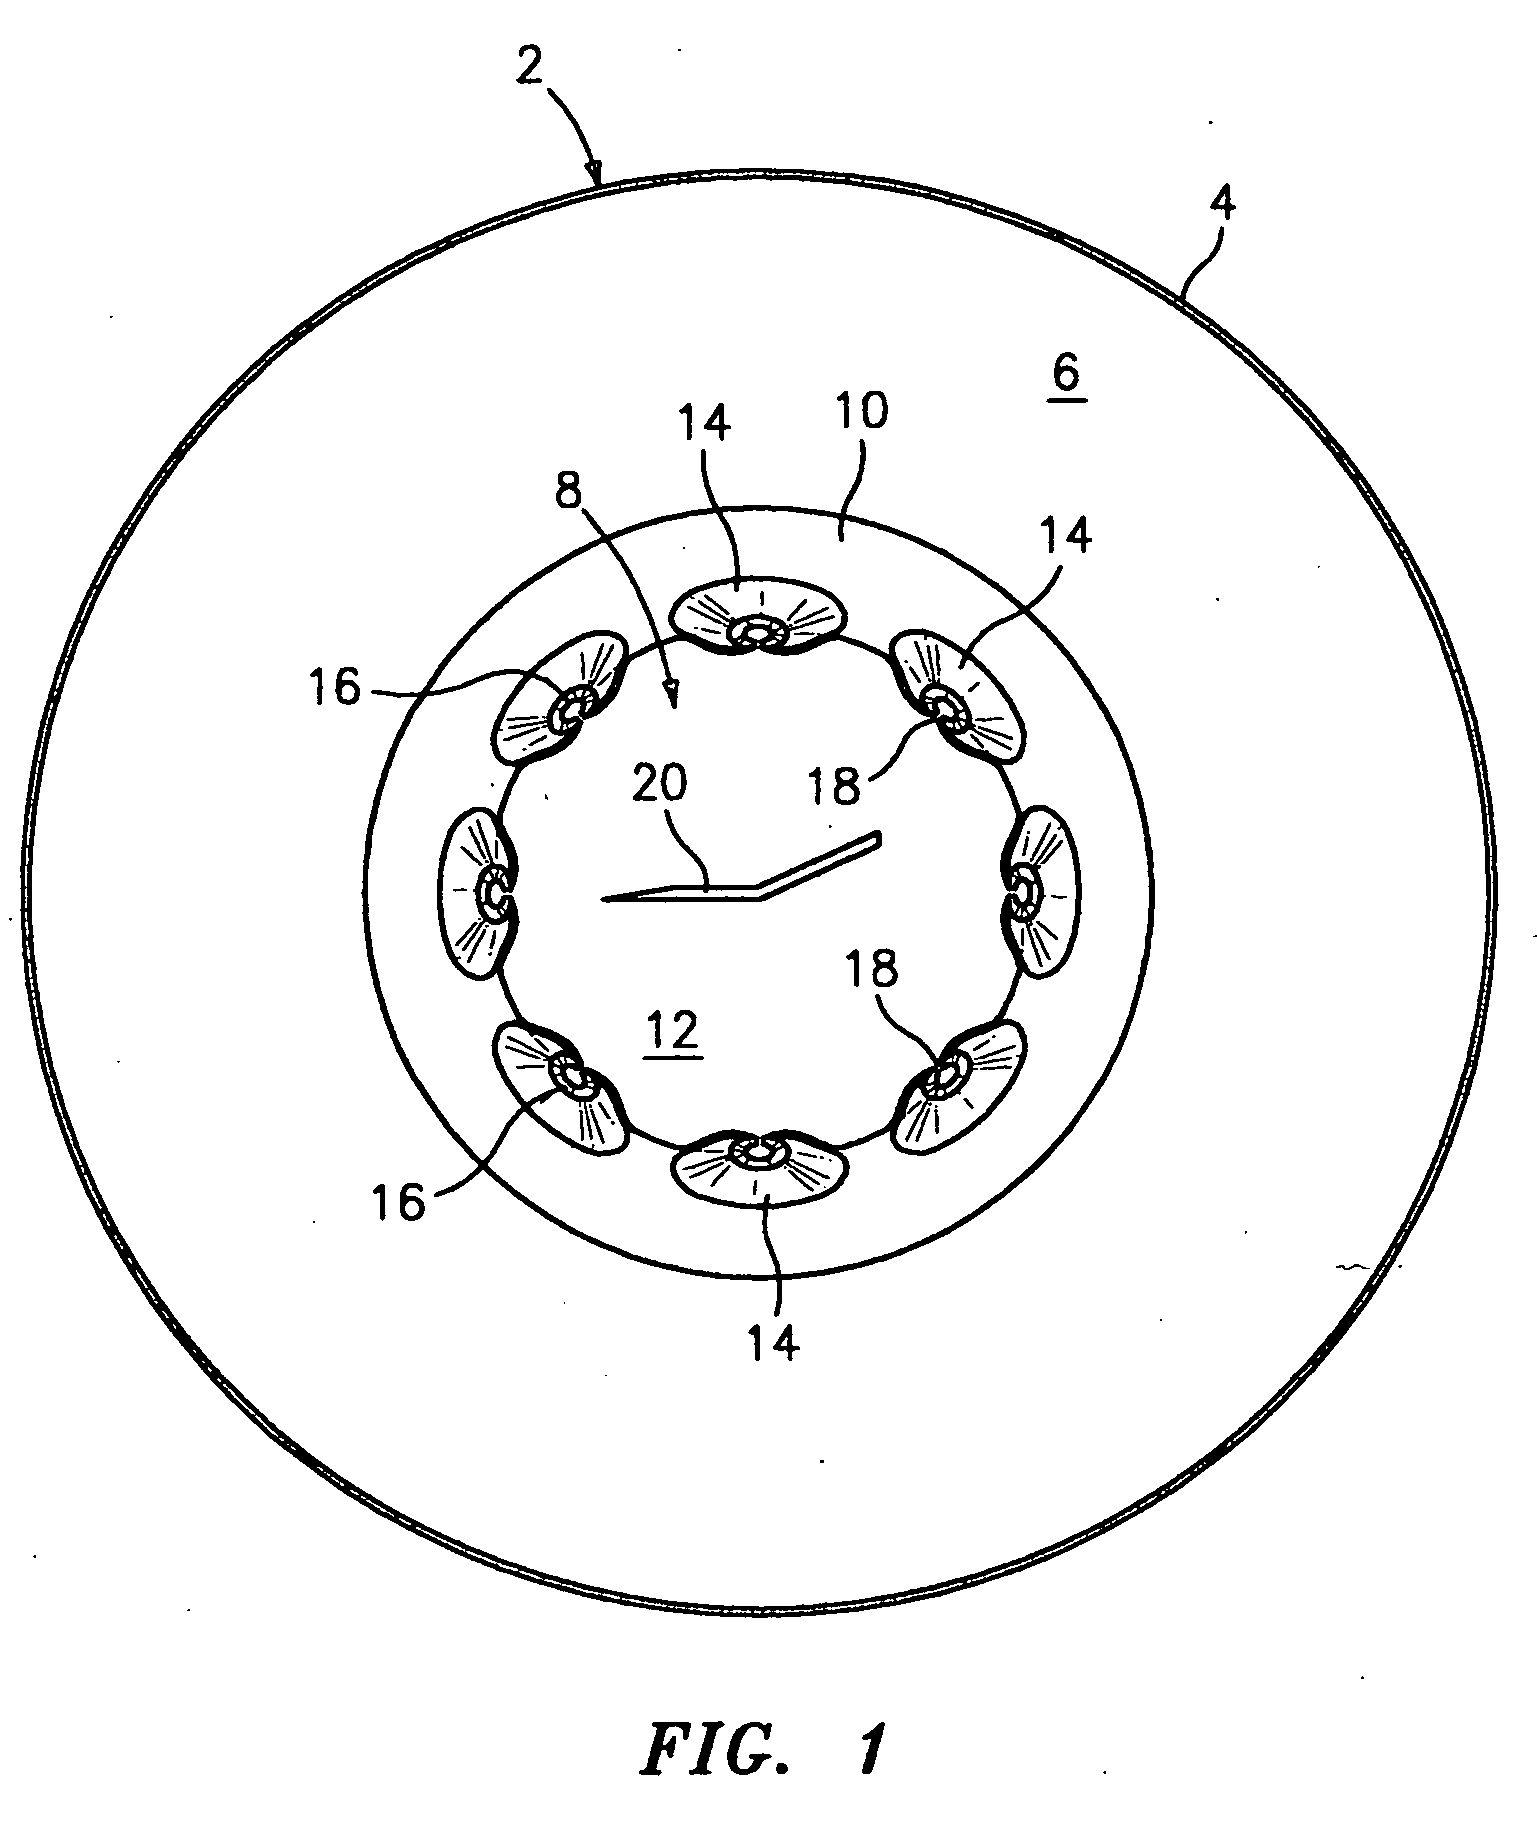 Specimen manipulation device for micro manipulation and biopsy in assisted reproduction and in vitro fertilization